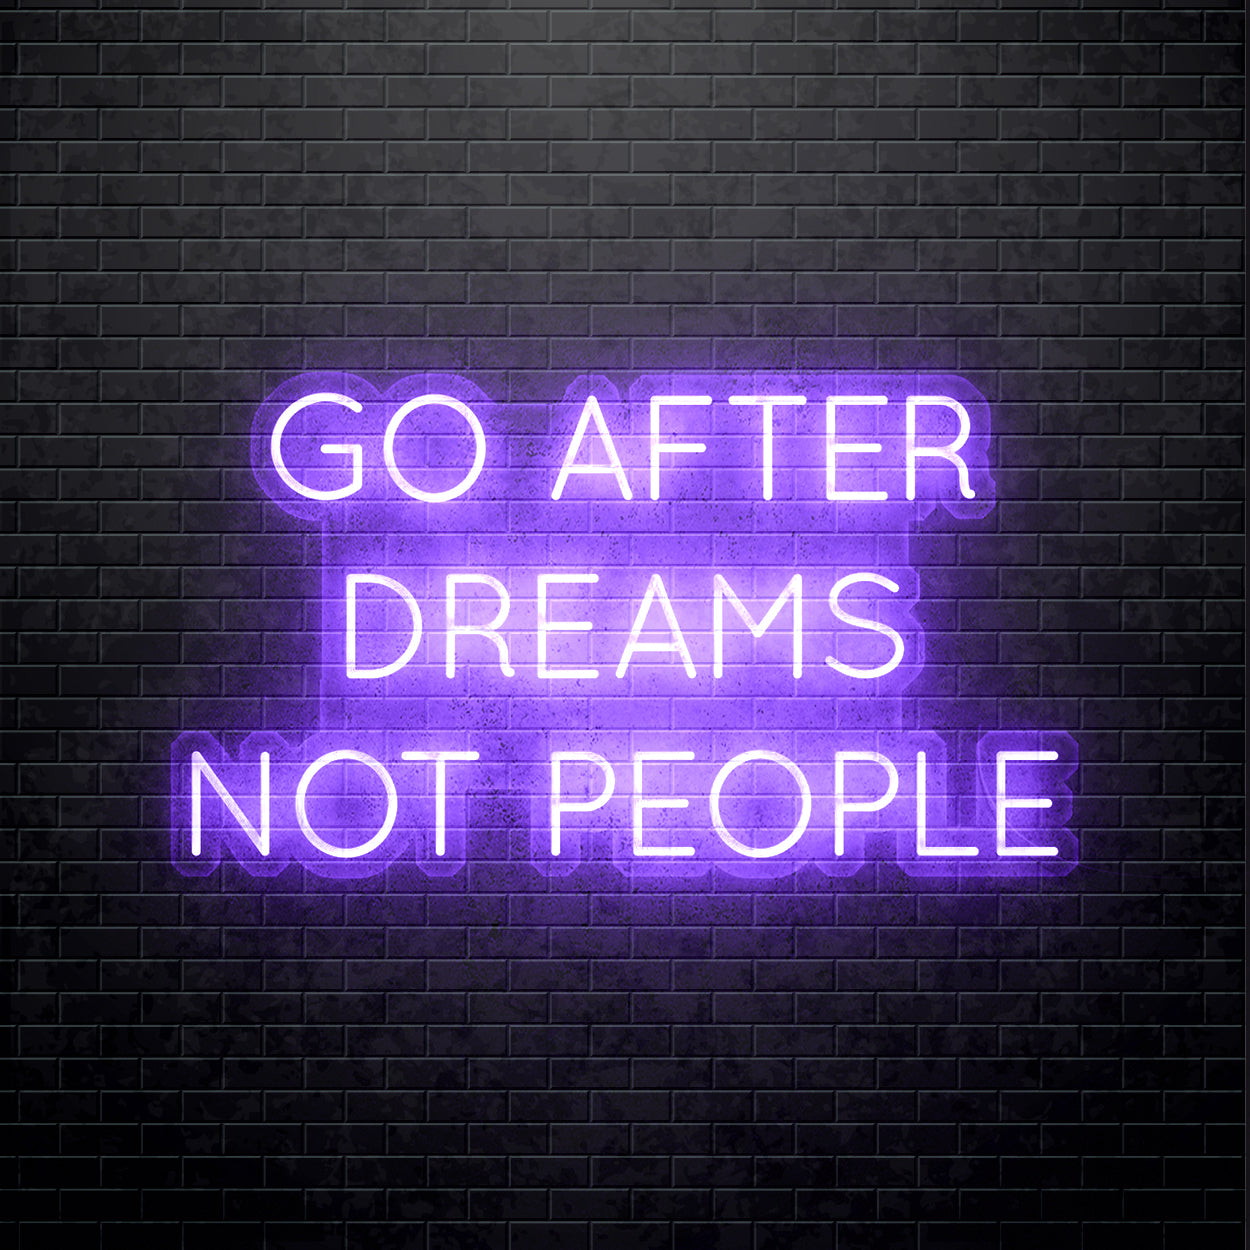 LED Neon sign - Go after dreams not people